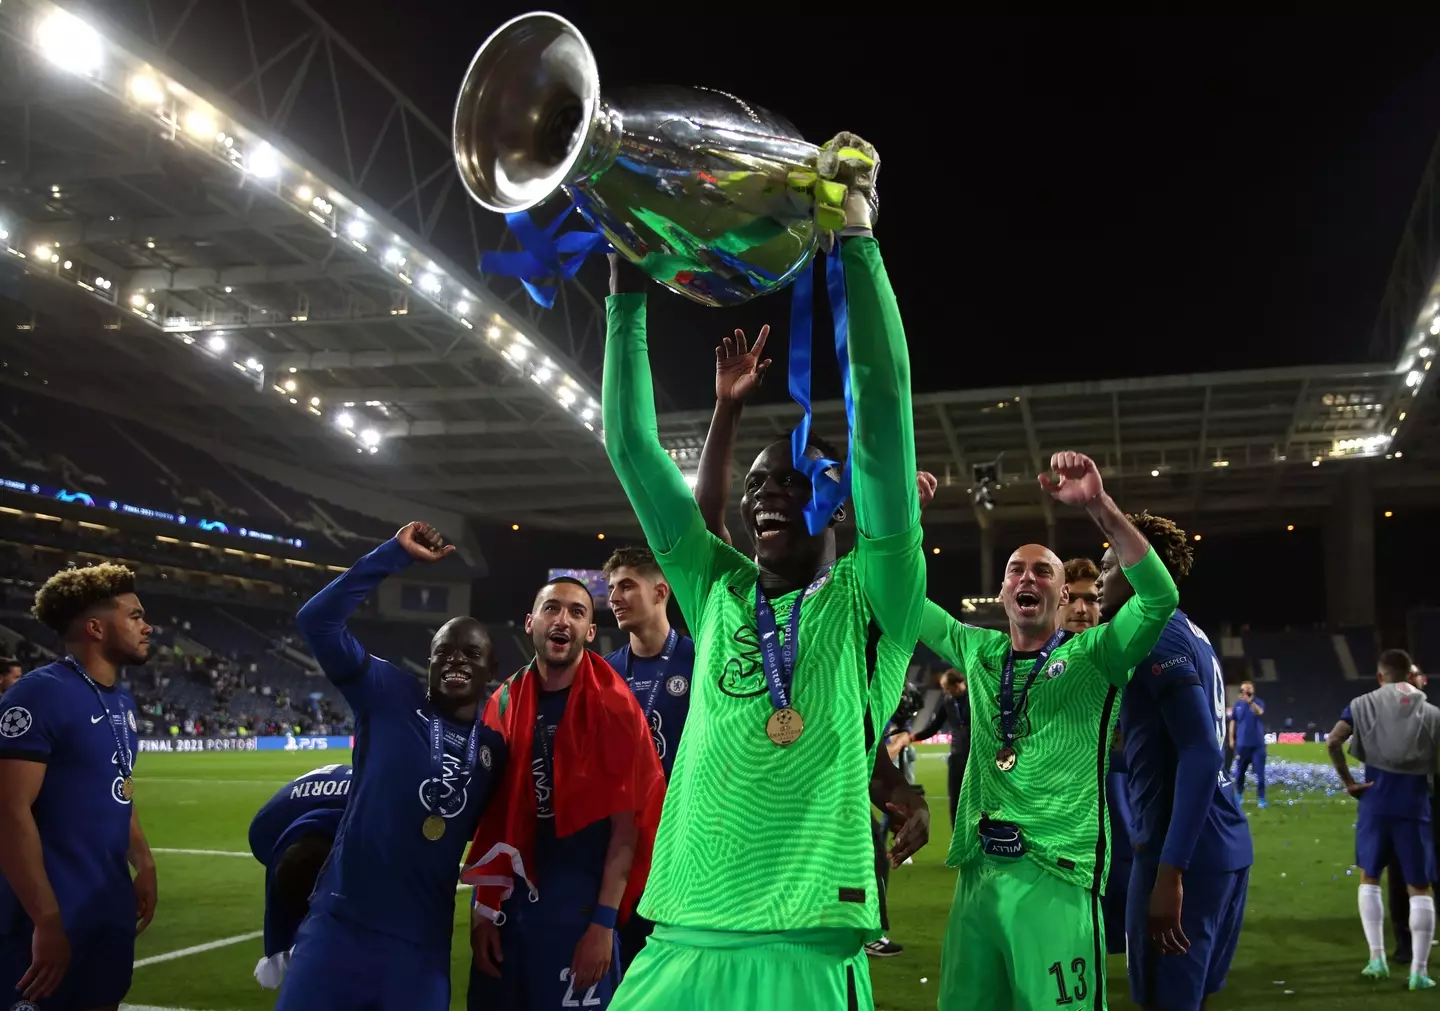 Chelsea's Edouard Mendy with the trophy following the UEFA Champions League final in 2021. (Alamy)